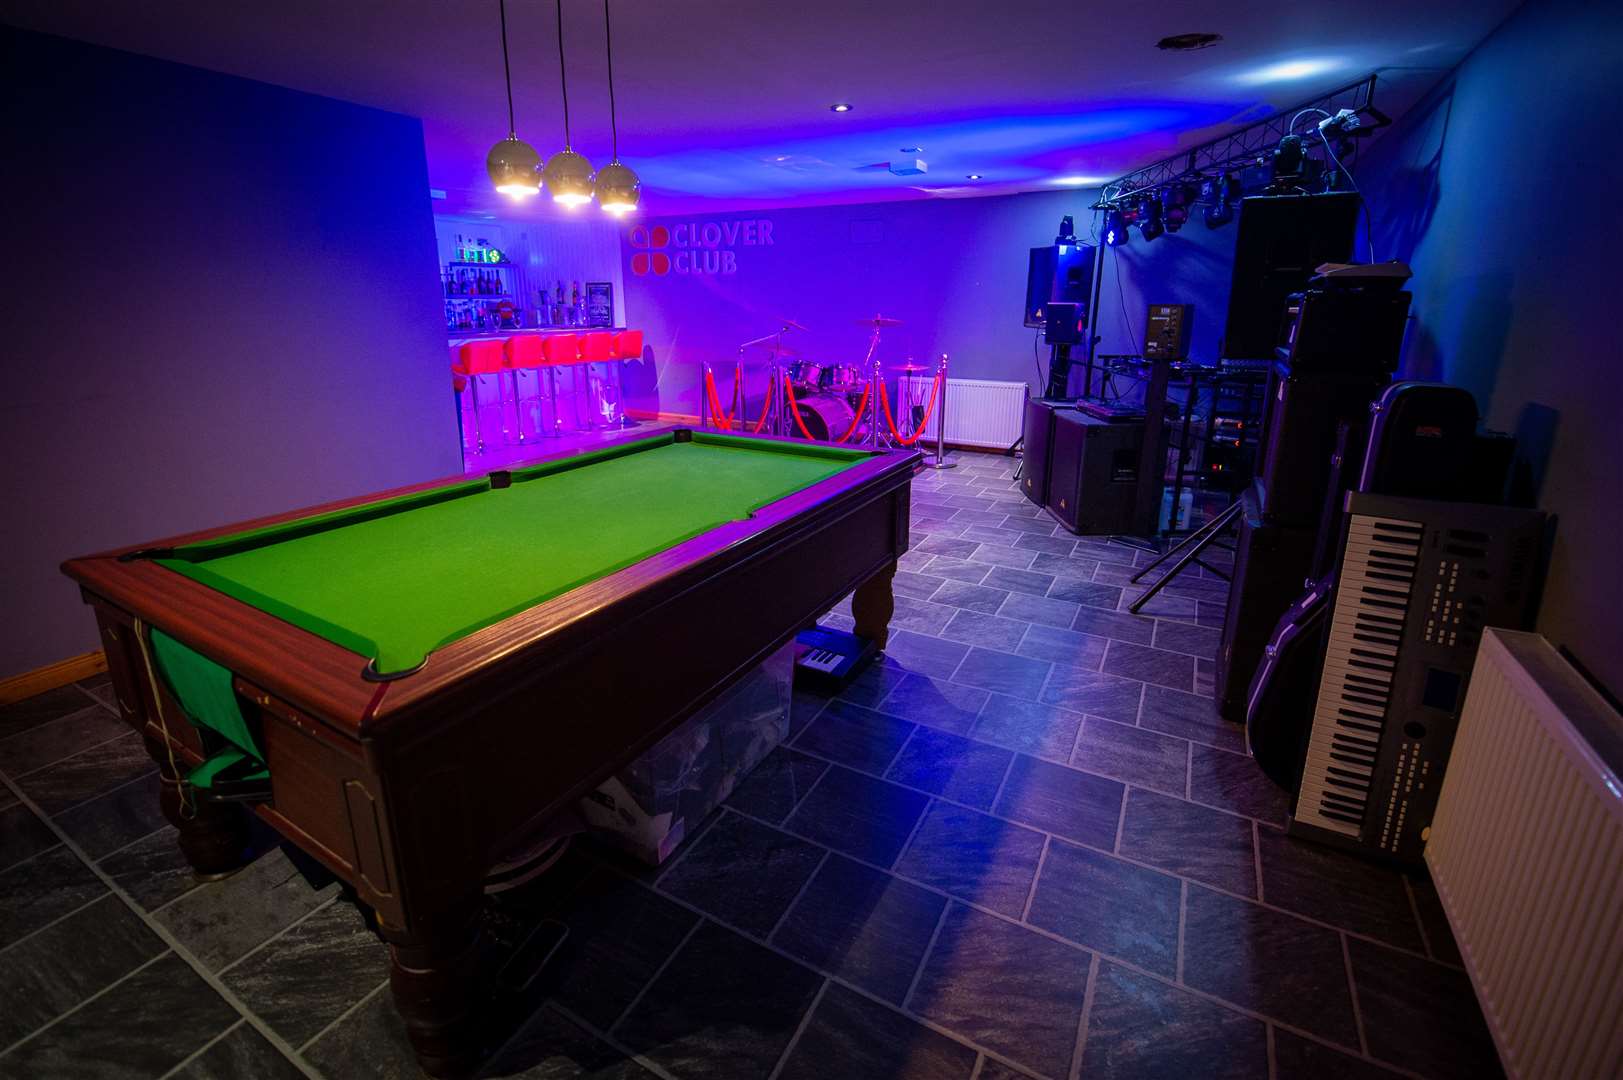 The venue even has a pool table.